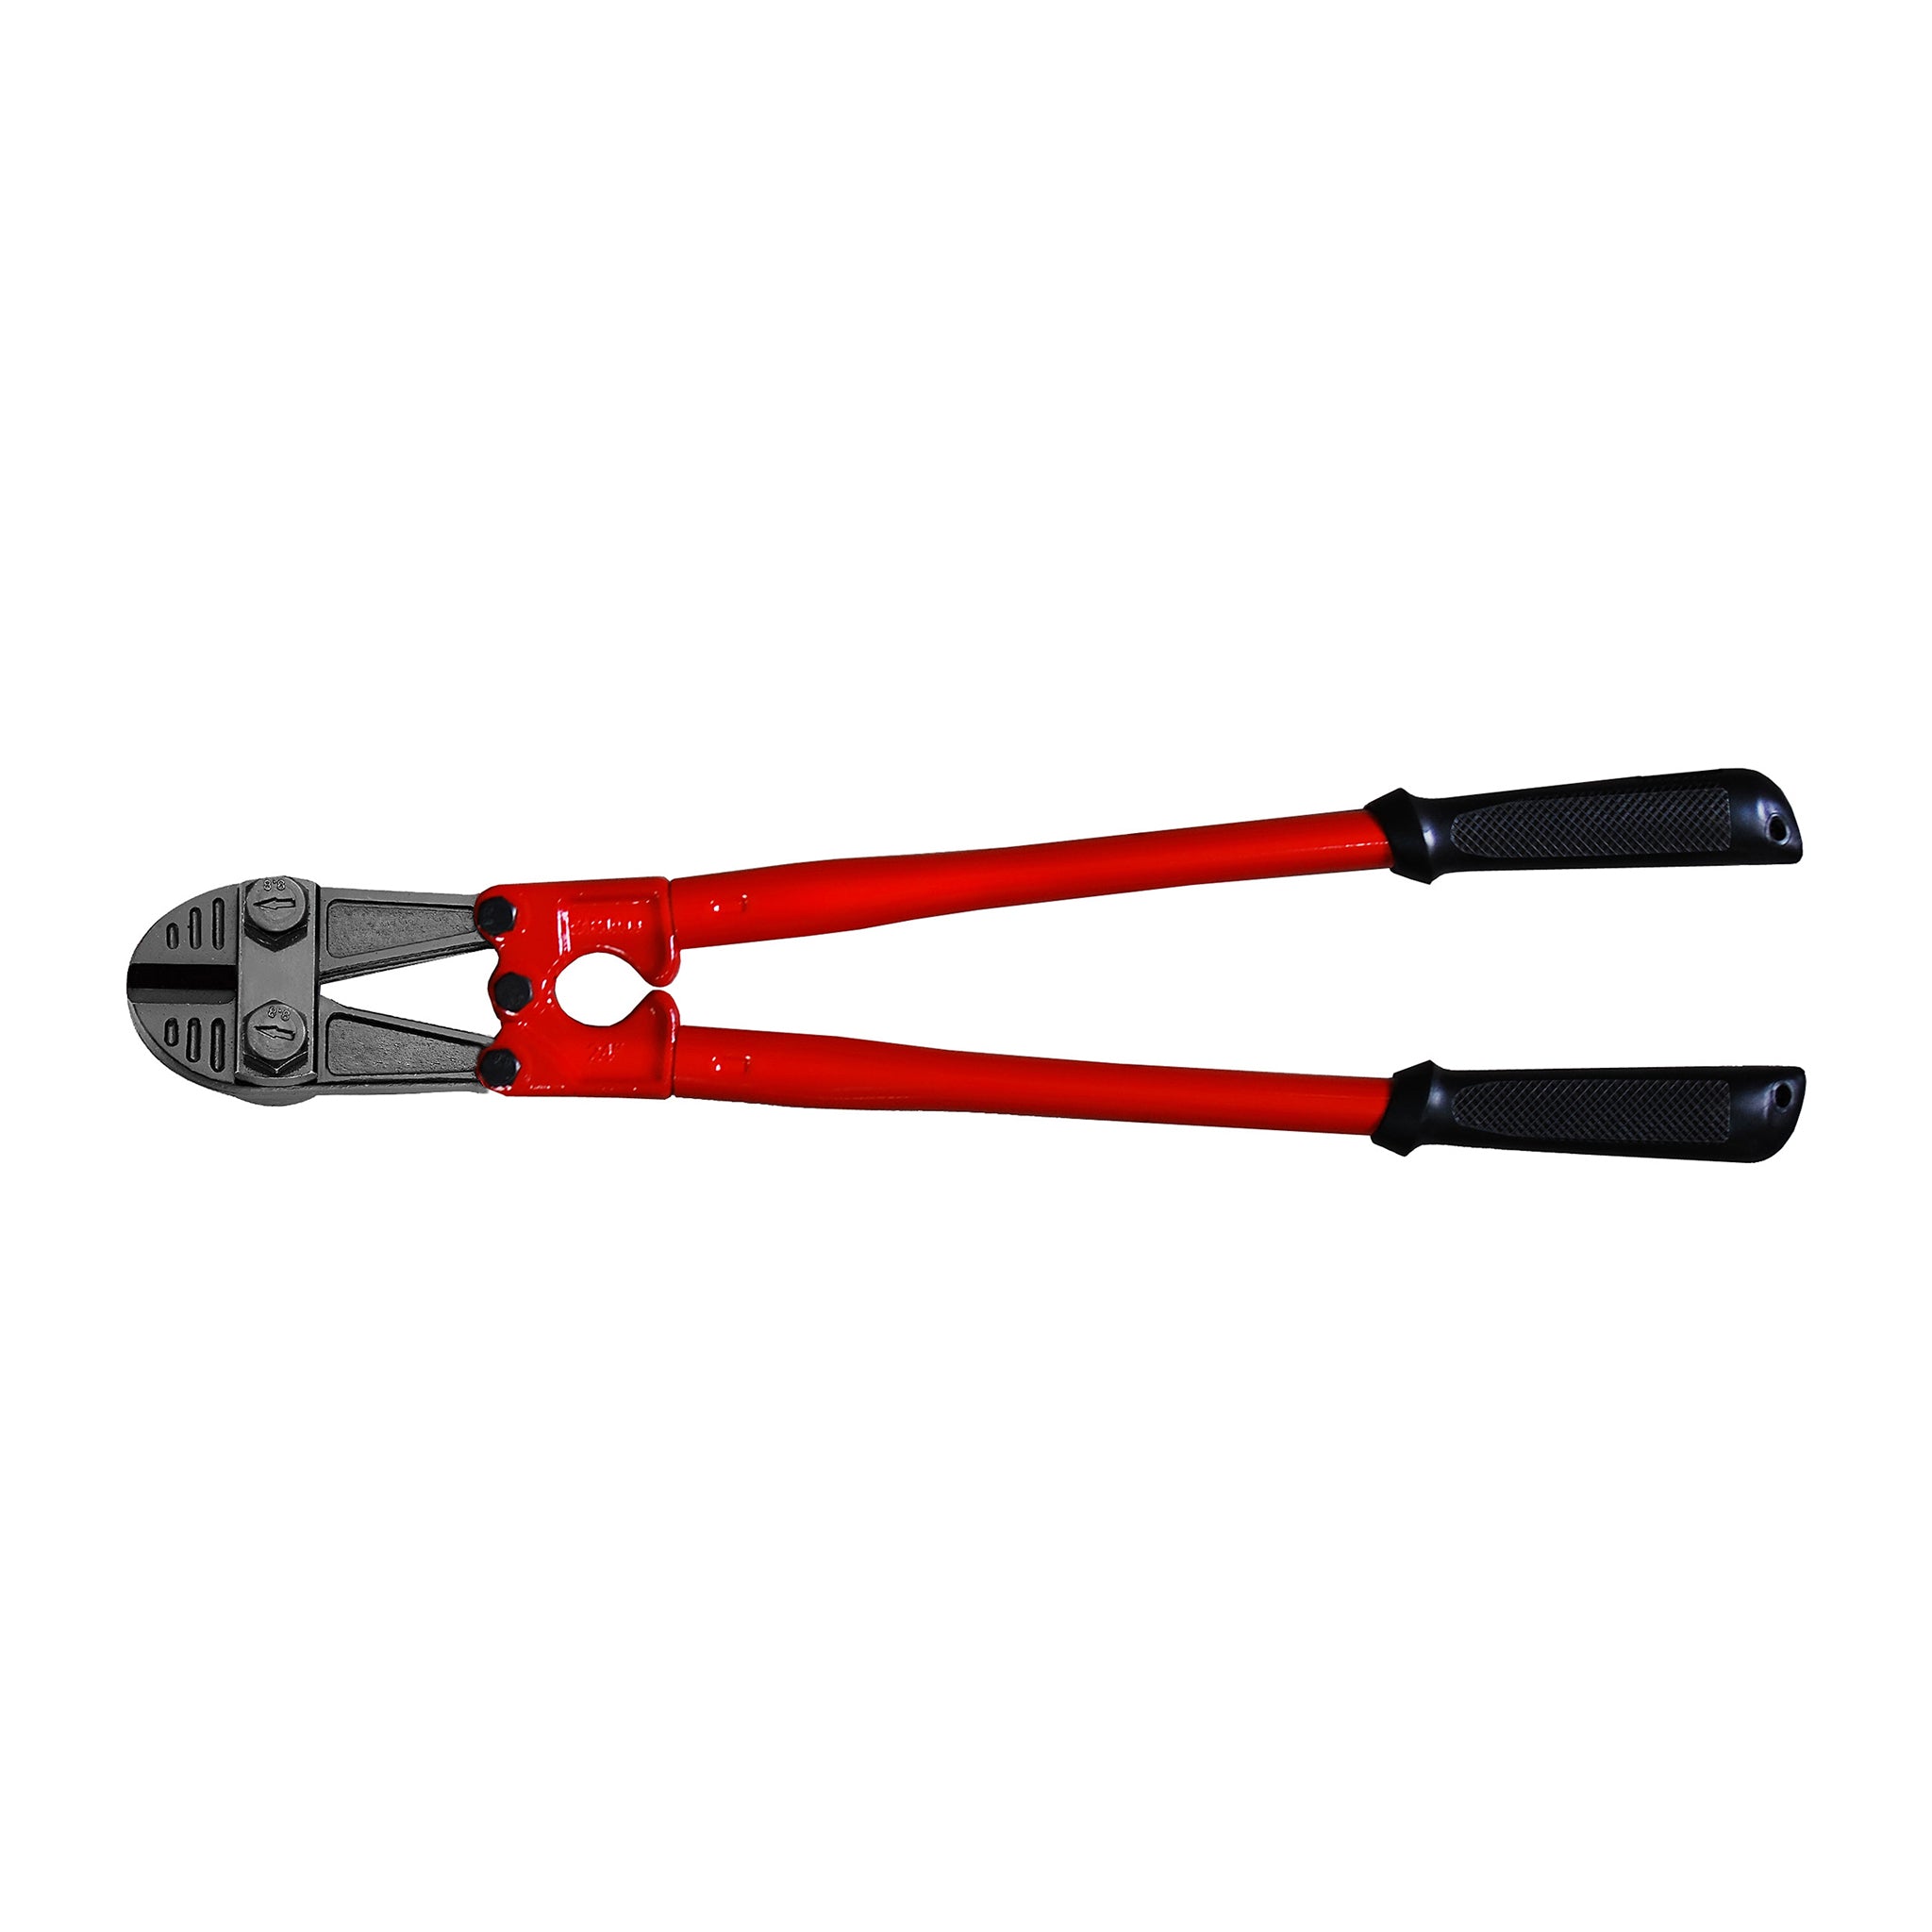 Teng Tools Bolt Cutters With Dipped Handle 8 To 36 Inches - 36 Inch